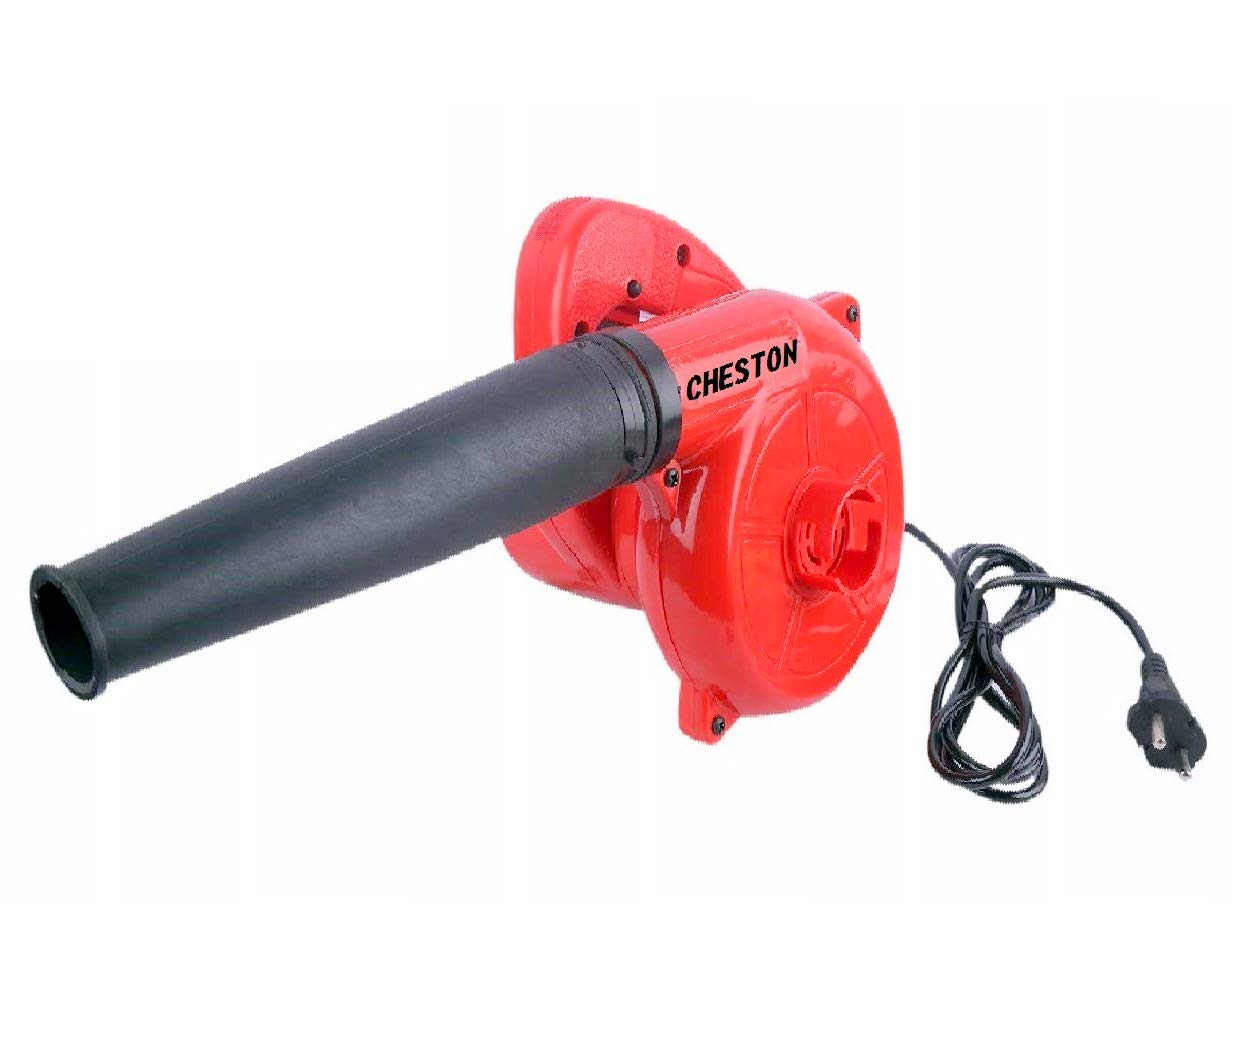 Cheston 65 Miles/Hour Electric Air Blower Dust PC Cleaner (500W, Red)